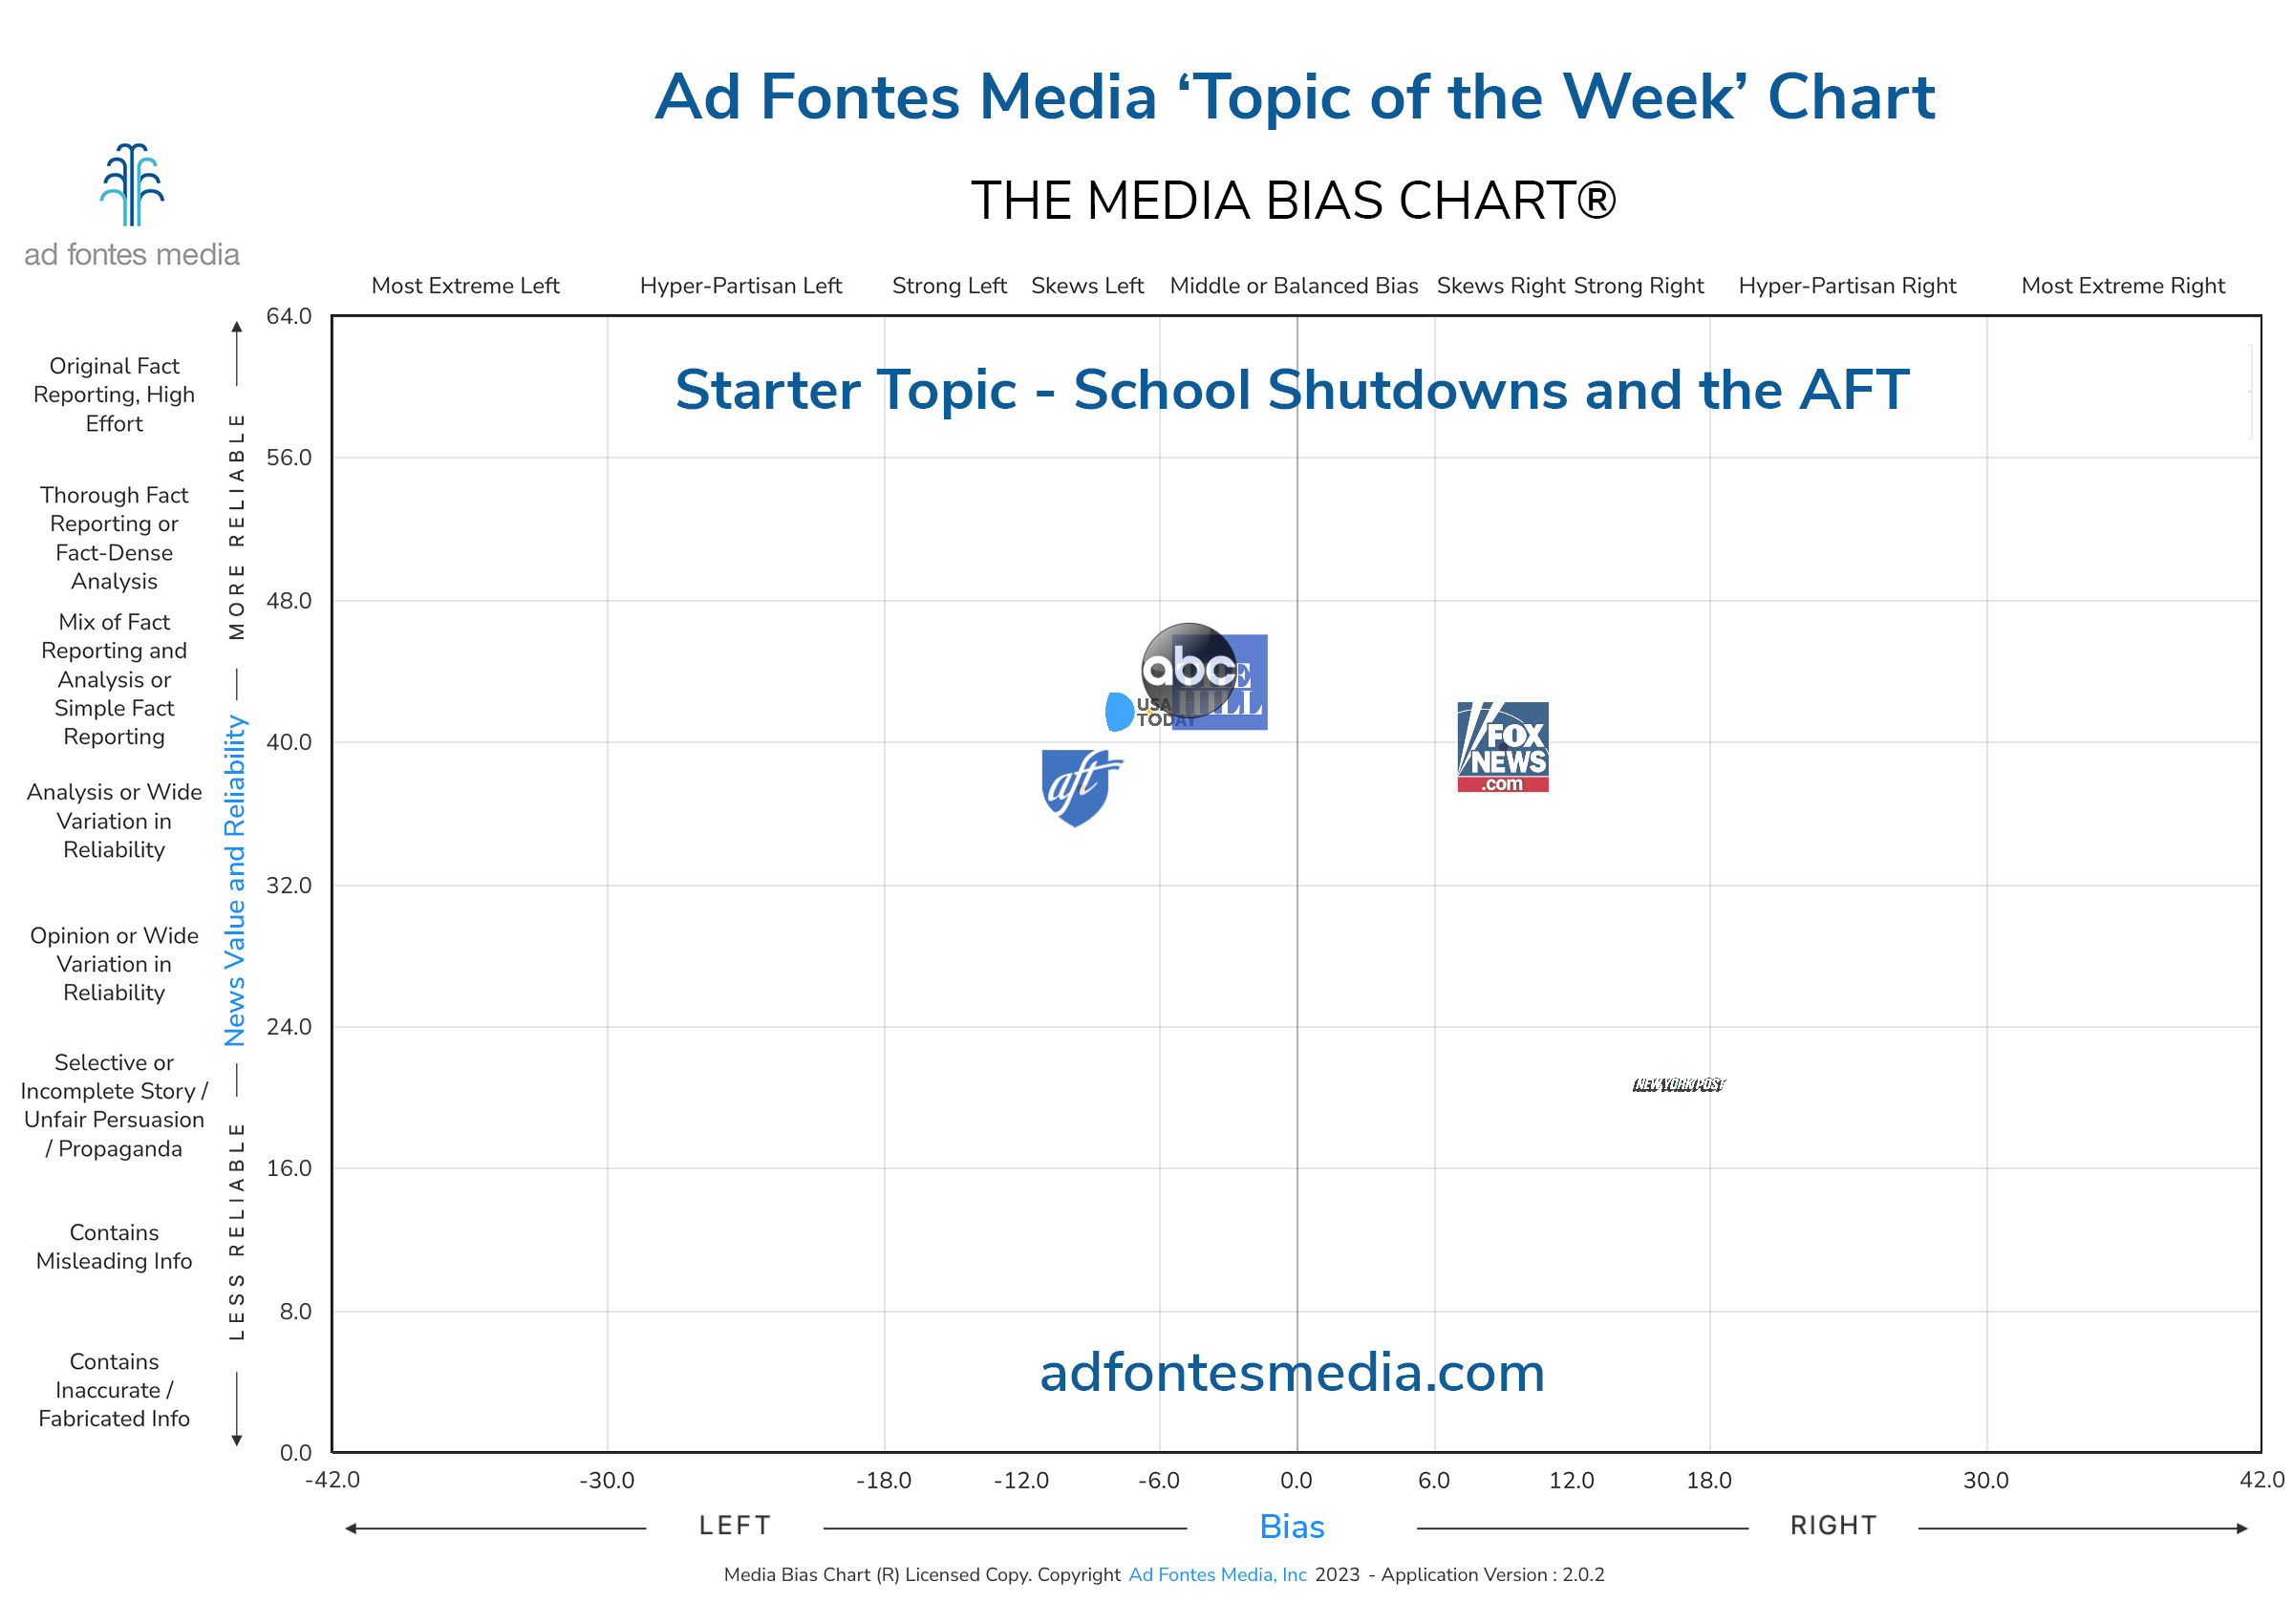 Scores of the School Shutdowns and the AFT articles on the chart